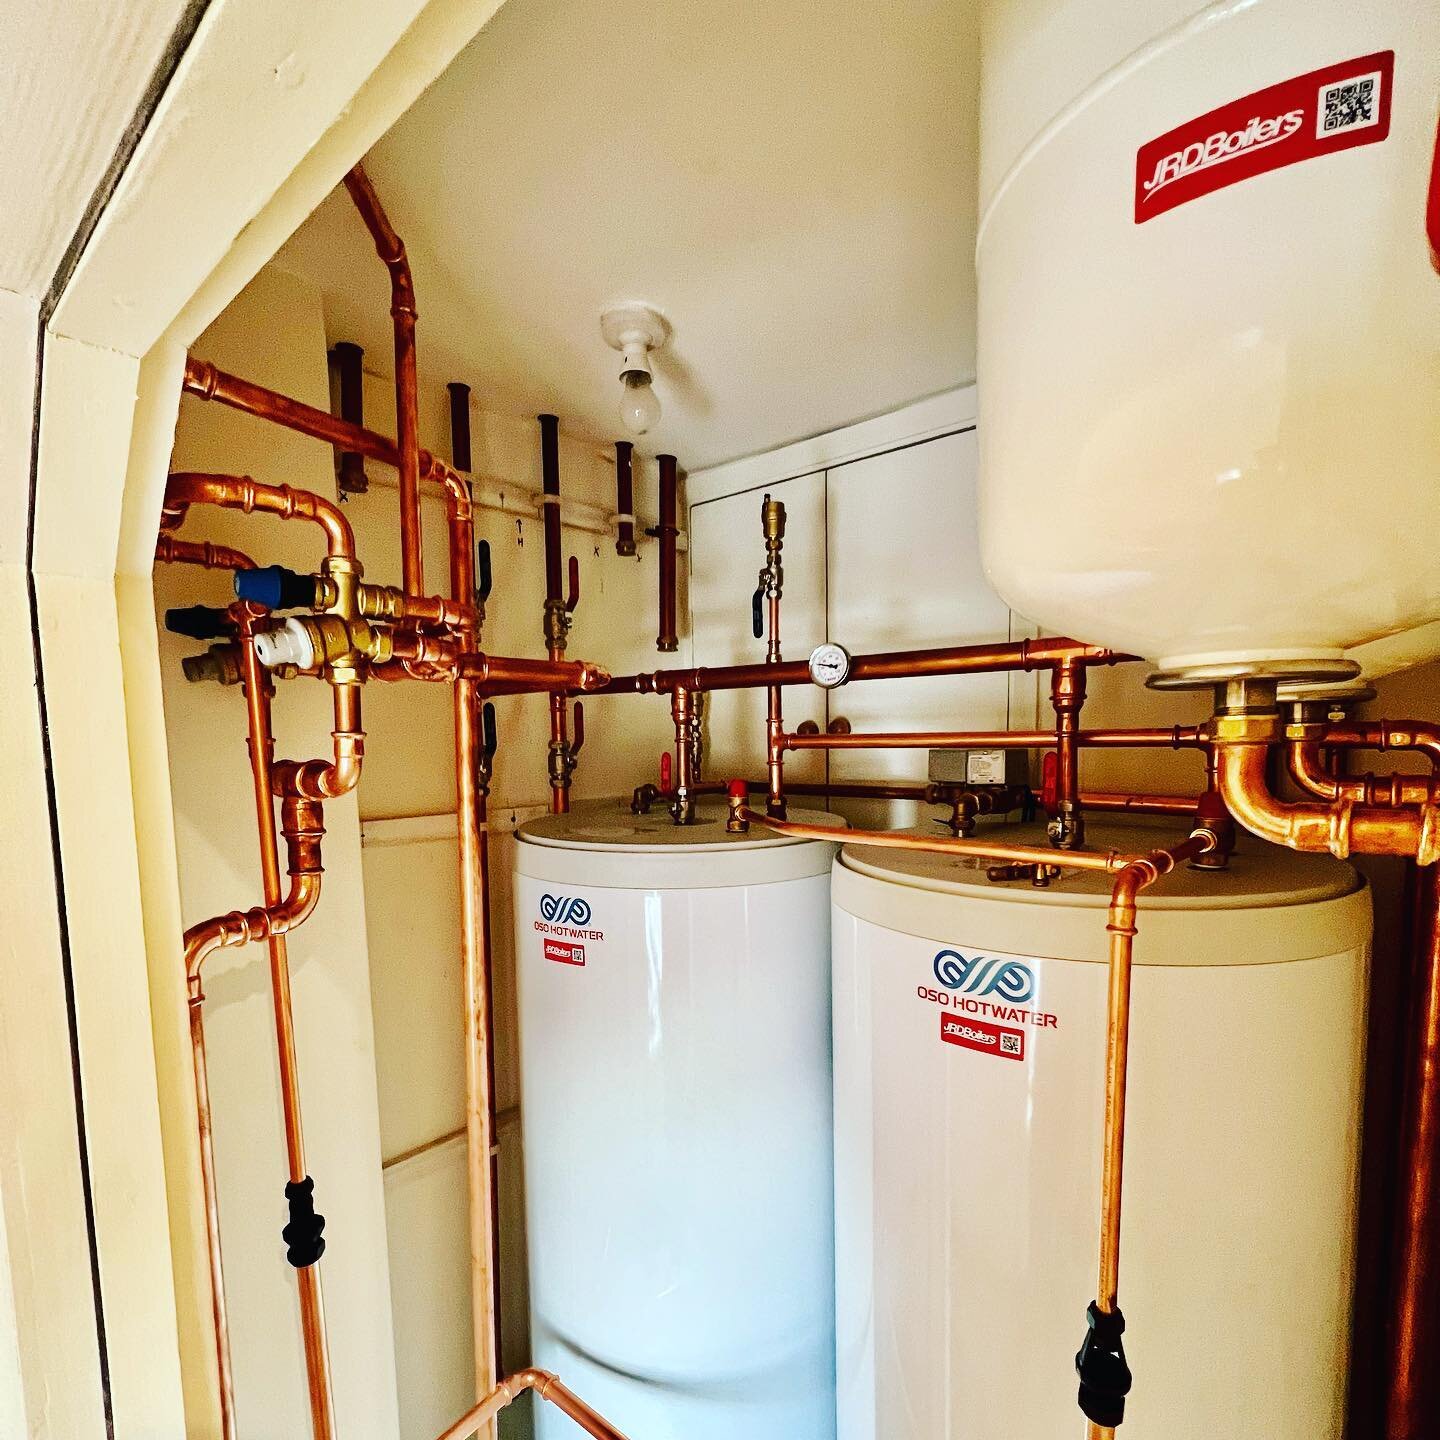 Nearly finished with this #commercialhotwater install for a local hotel. Just a few Munson rings and lagging to go! #osohotwater @osohotwateruk @novopress @geberituk